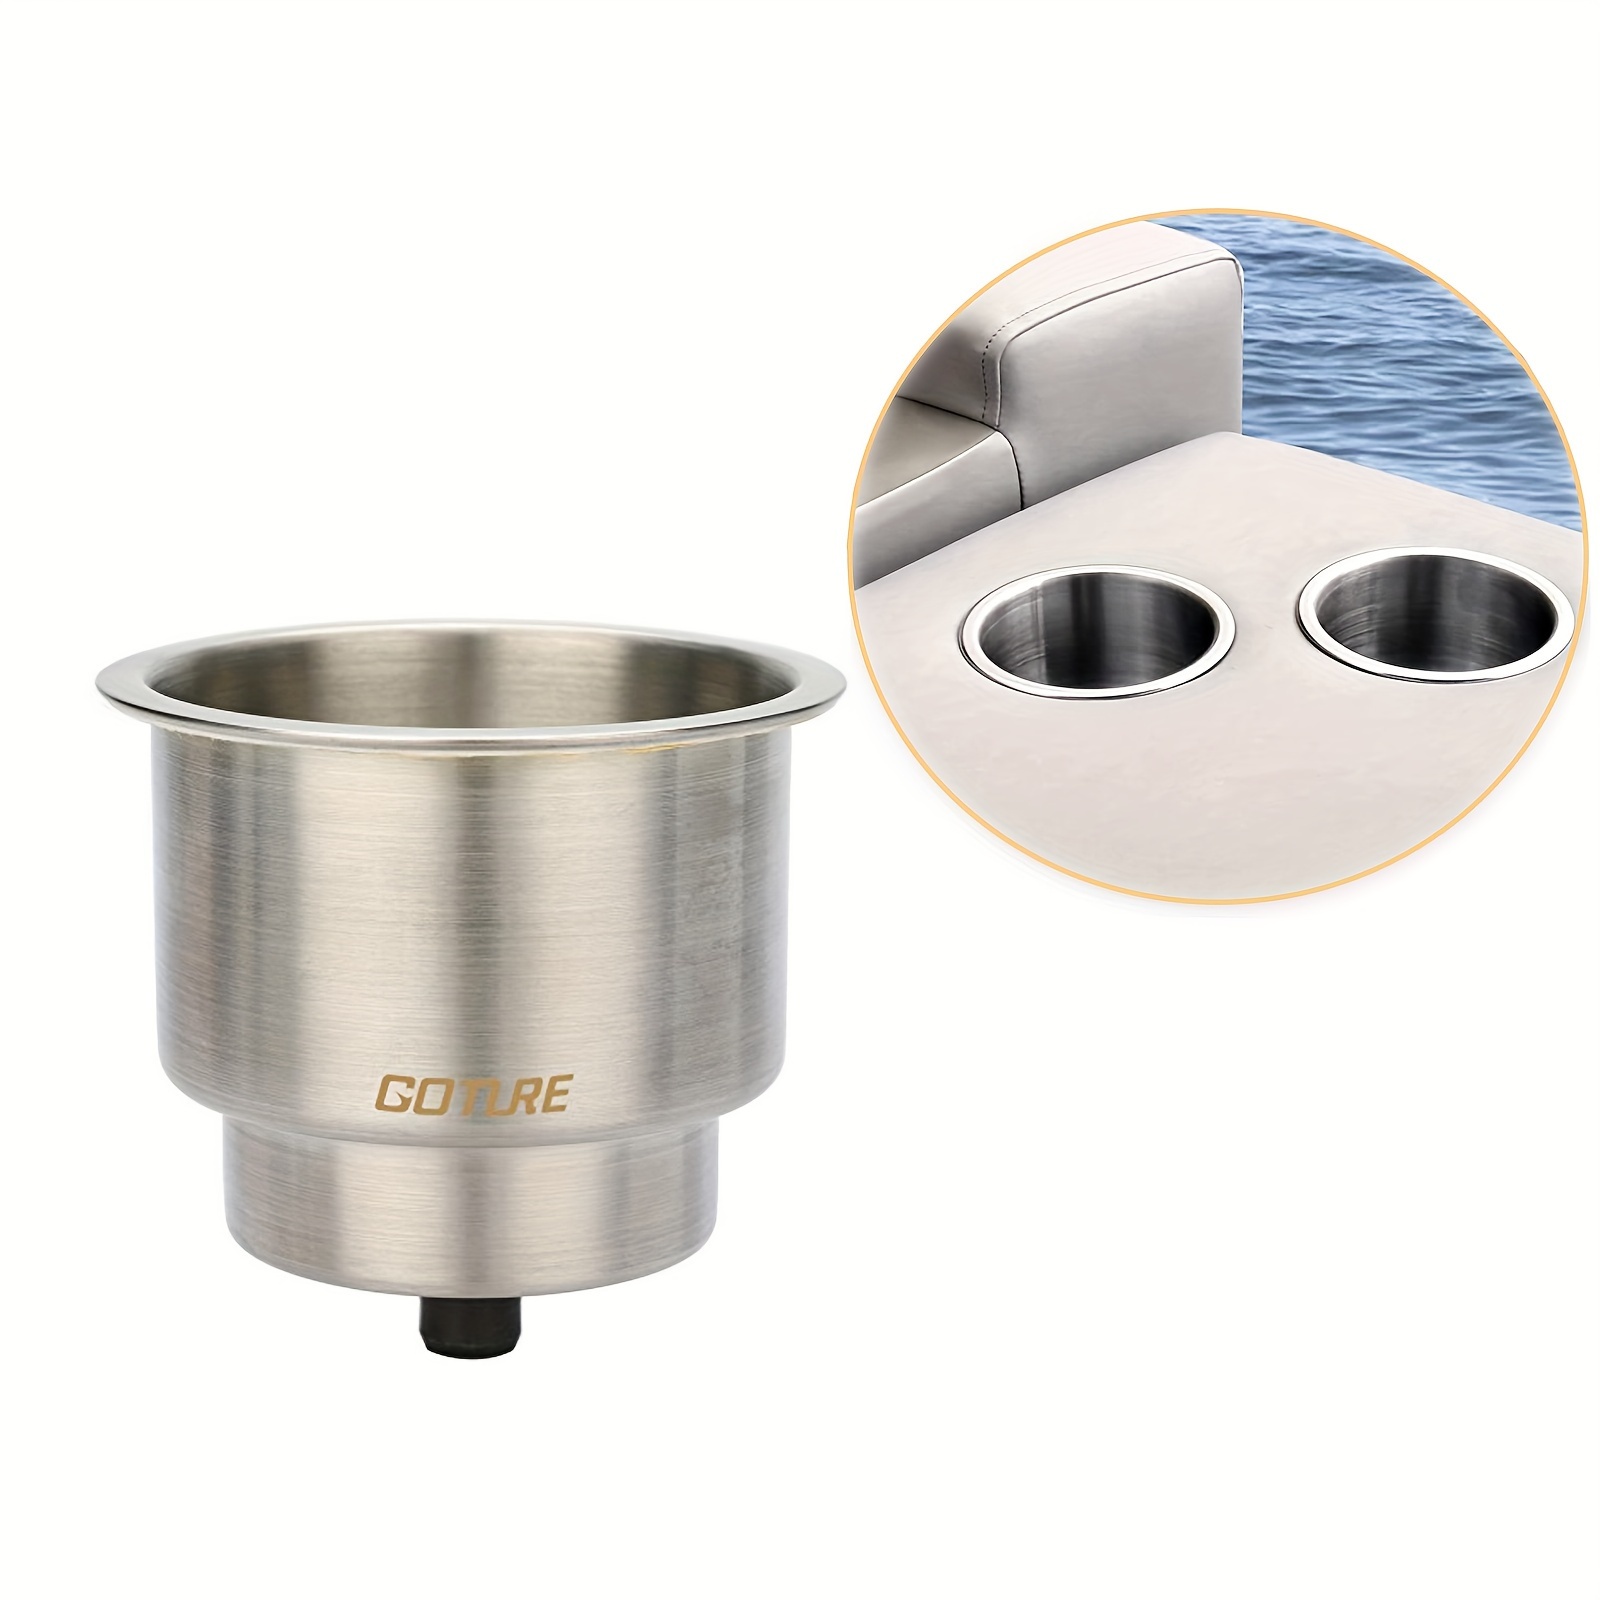 Goture Stainless Steel Cup Drink Holder with Drain Marine Boat Rv Camper Rod